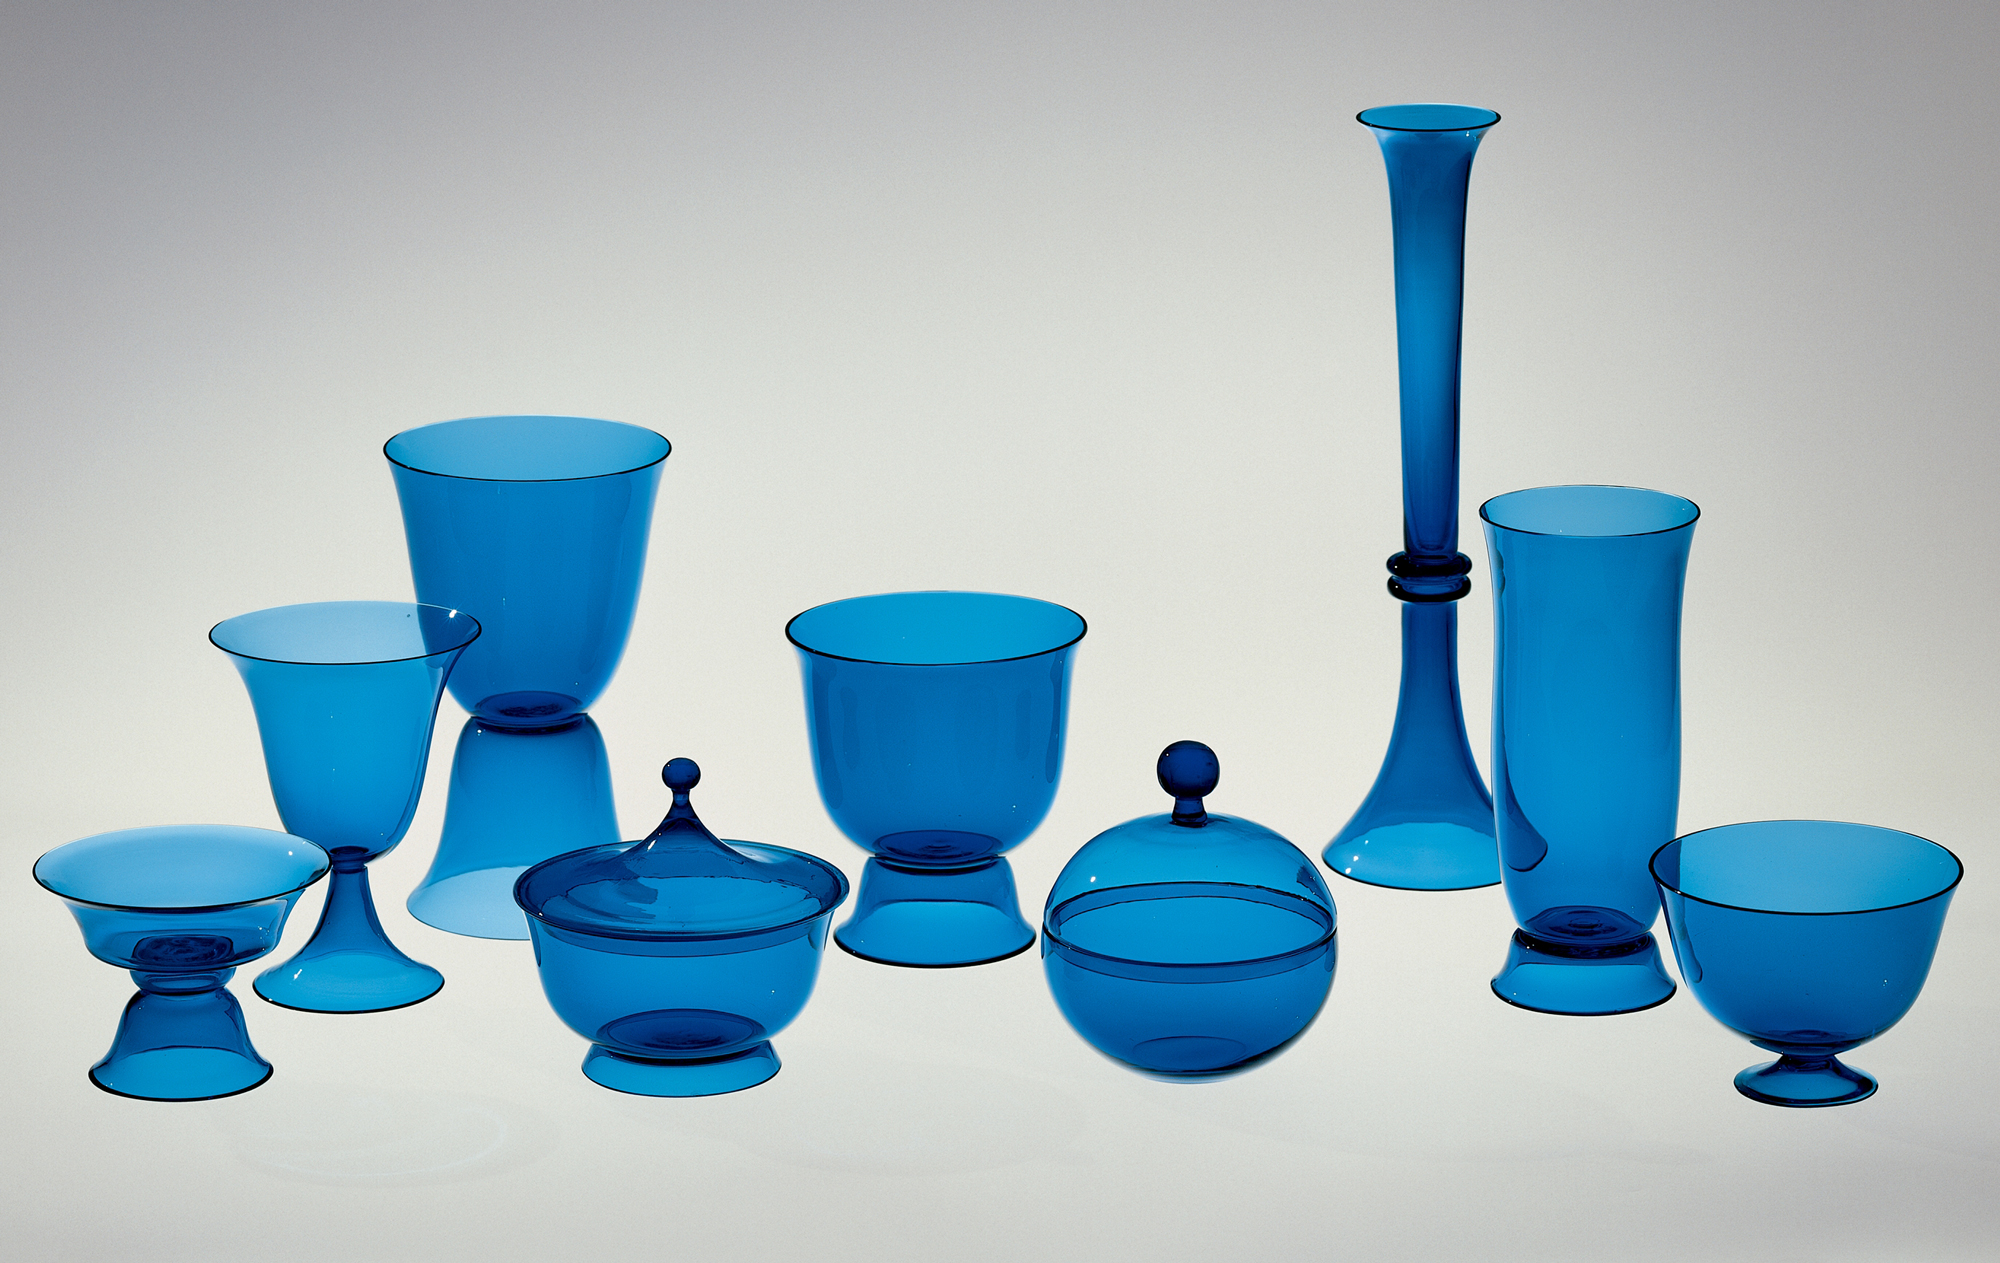 Tableware Set of Nine Blown Vessels, 1916. Designed by Josef Hoffmann (Austrian, 1870–1956); manufactured by Wiener Werkstätte and probably Meyr’s Neffe. Mold-blown and hot-worked glass. Smallest object: H. 8.2 cm, Diam. 11.6 cm; Tallest object: H. 32.8 cm, Diam. 9.5 cm. The Corning Museum of Glass (74.3.24).